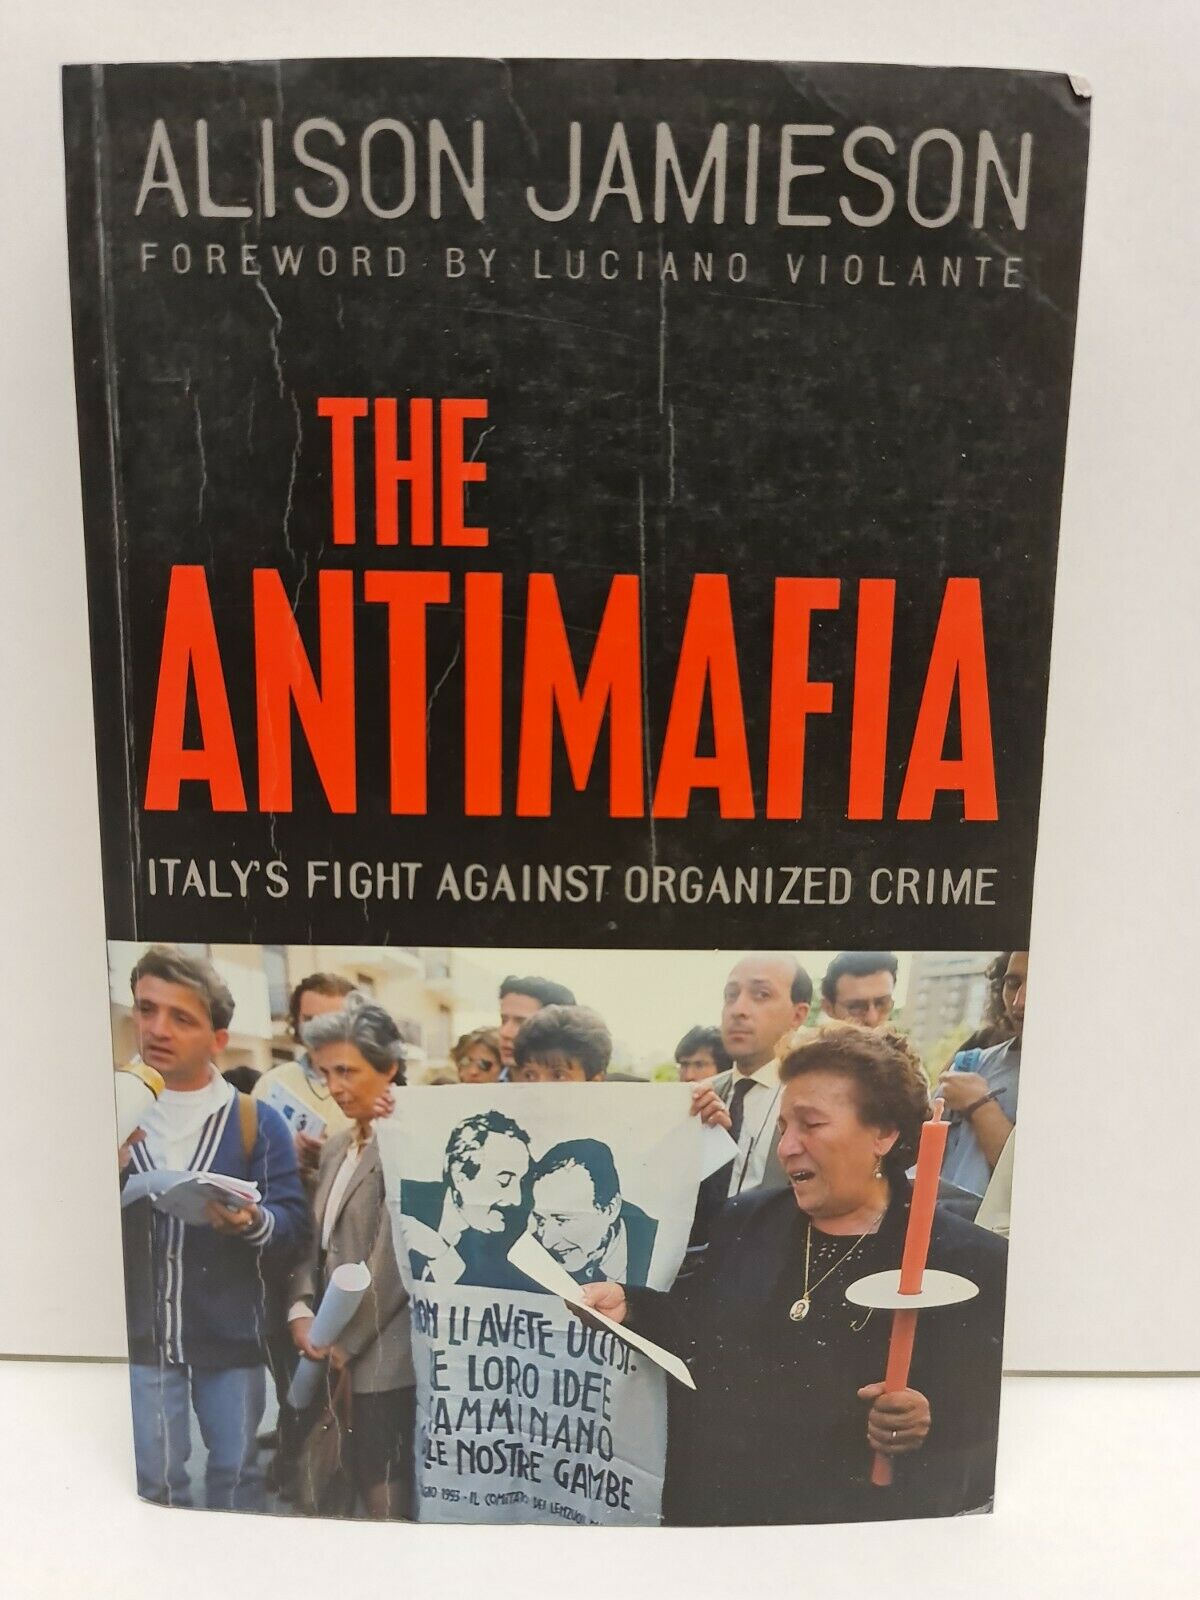 The Antimafia: Italy's Fight against Organized Crime by A. Jamieson